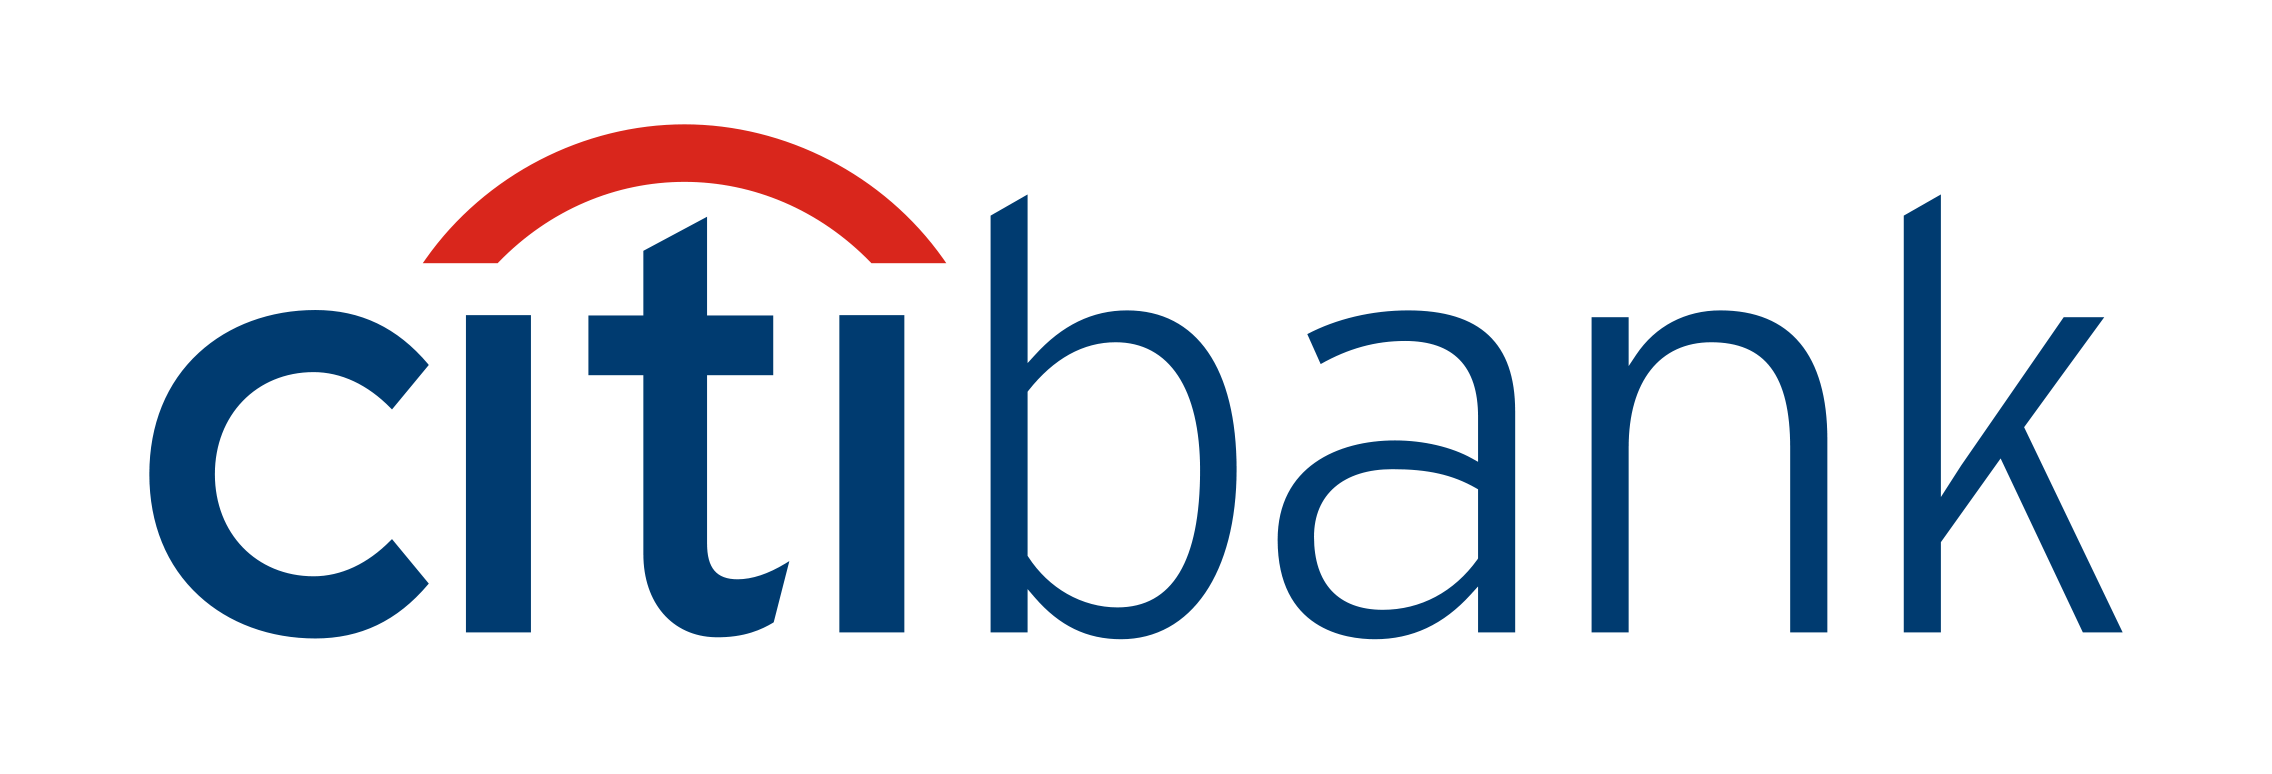 Citibank Logo - Citibank Logo, Citibank Symbol Meaning, History and Evolution